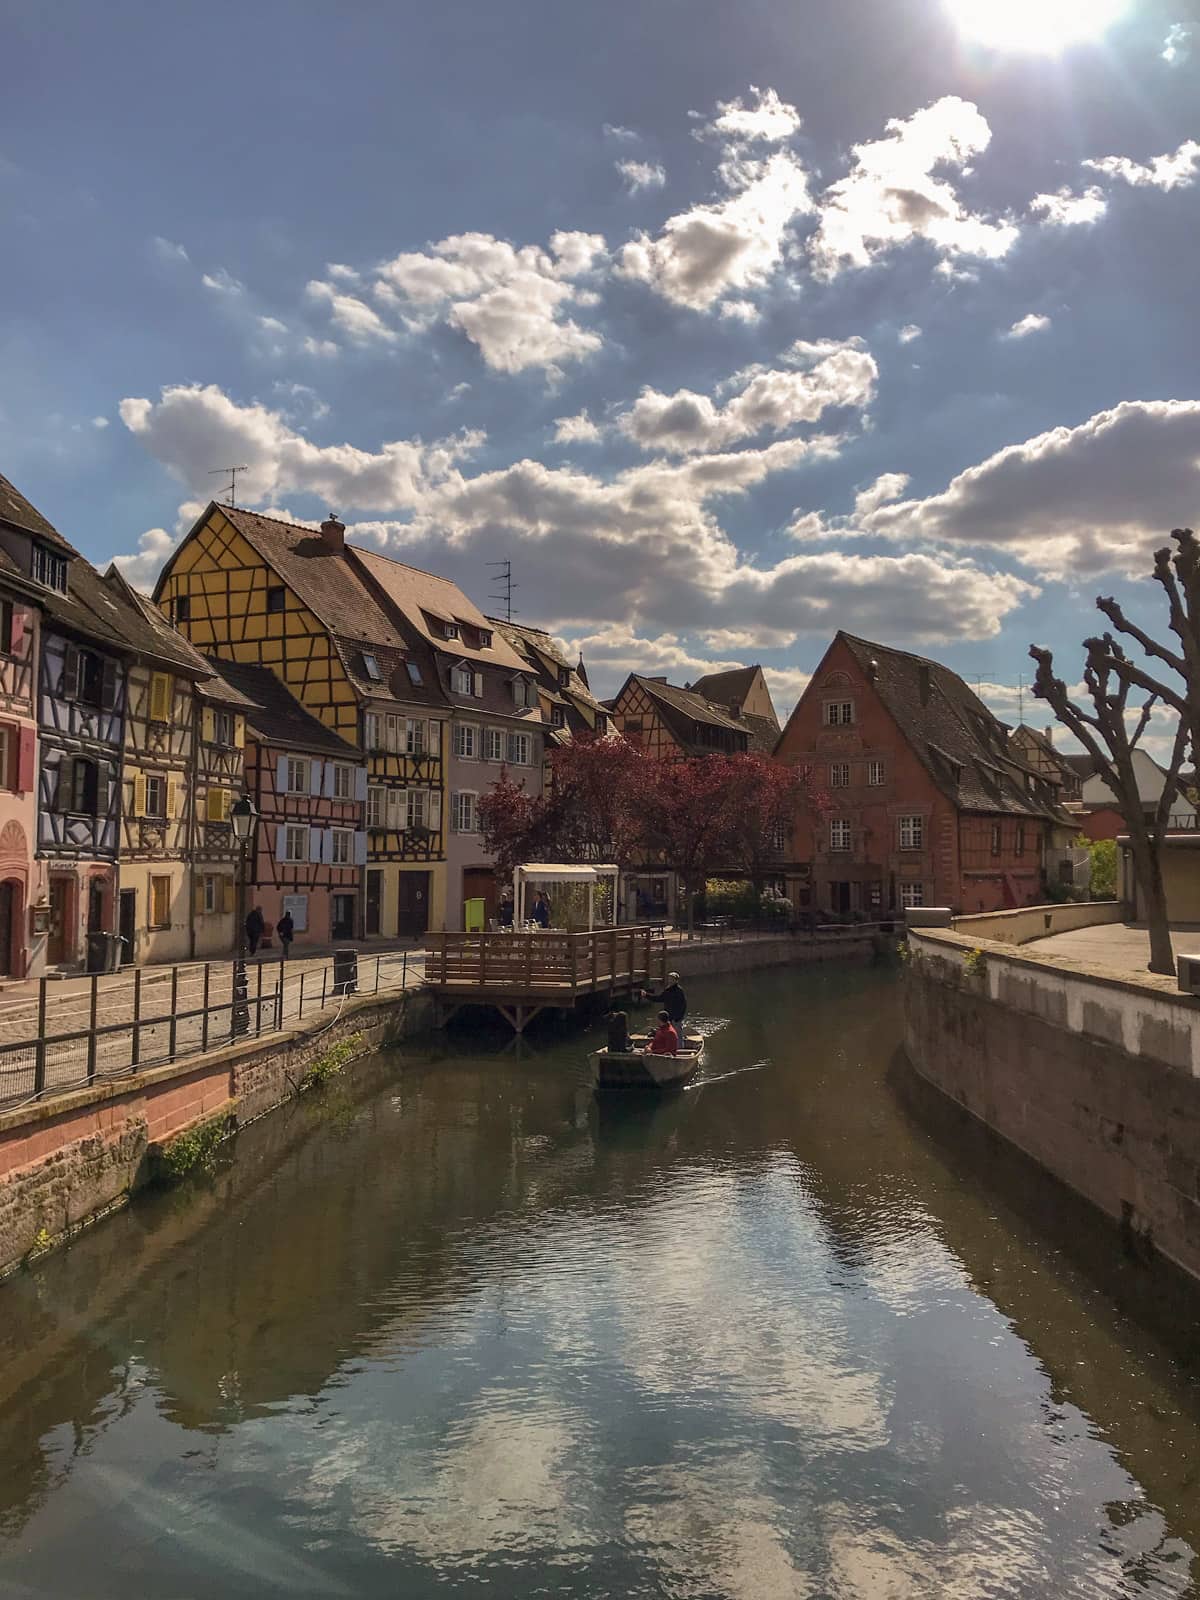 A river in Colmar, France, showing some people in a small boat leaving one side of the river. The buildings on the side of the river are old and pastel-coloured but colourful